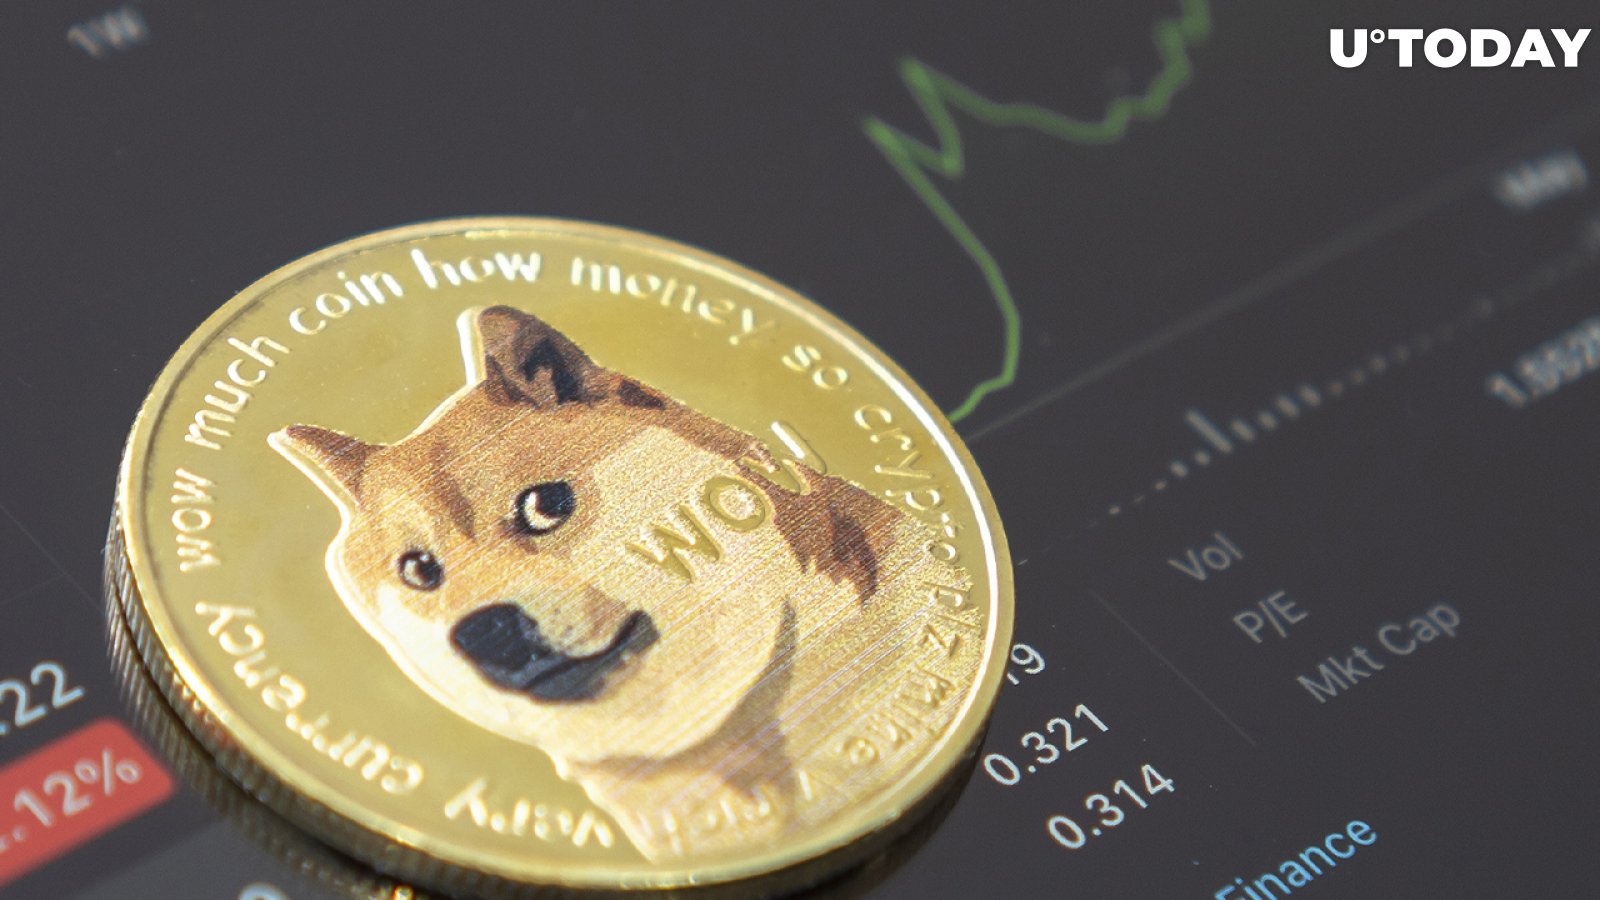  DOGE Flirts with $0.15, Dogecoin Creator Says He’s Ready for Trend Reversal